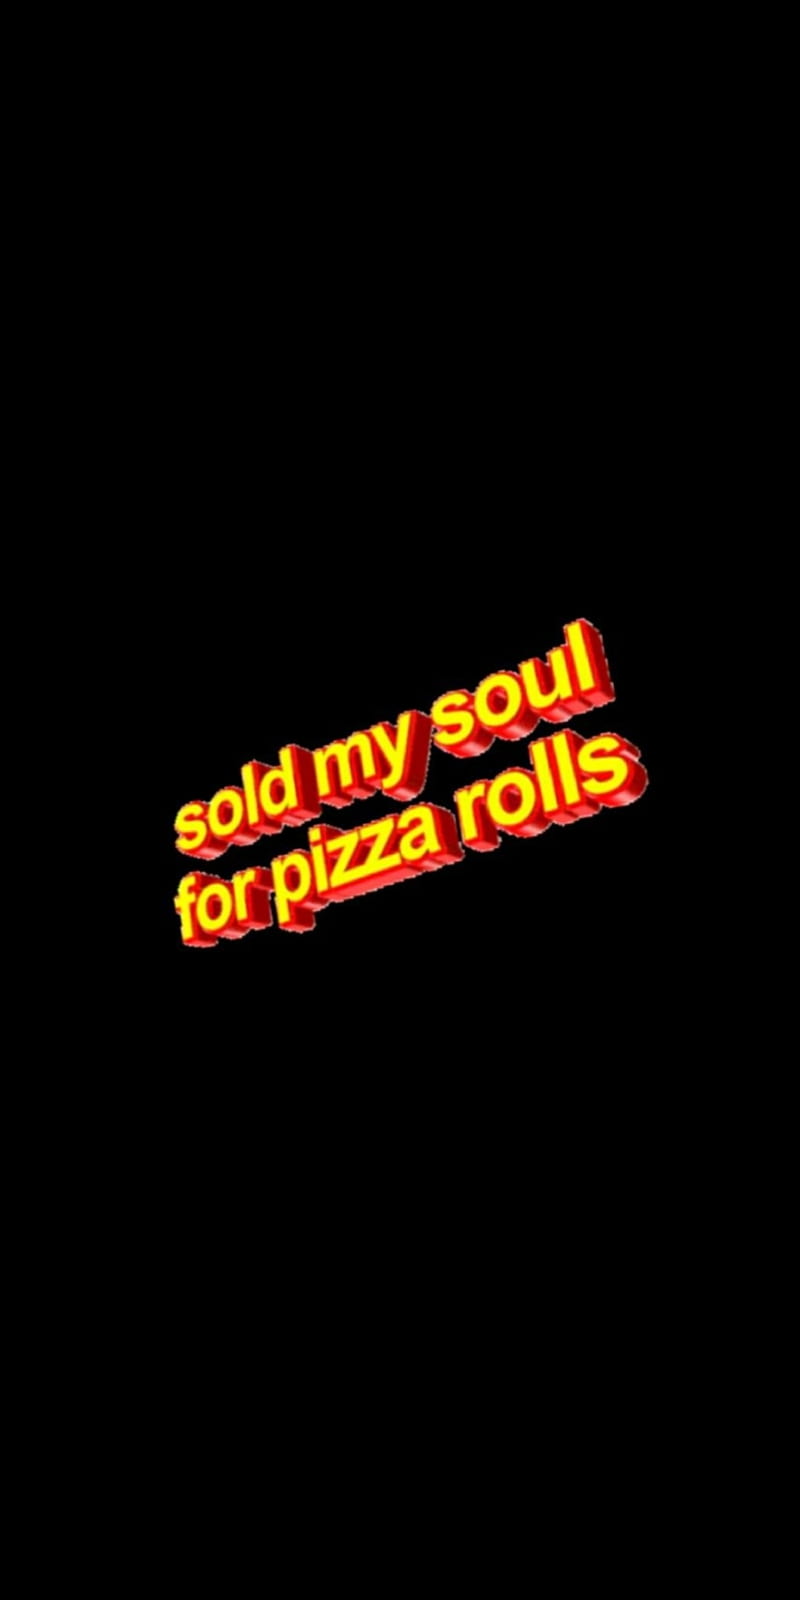 Pizza rolls , edgy, food, funny, humor, pizza rolls, sold my soul, HD phone wallpaper